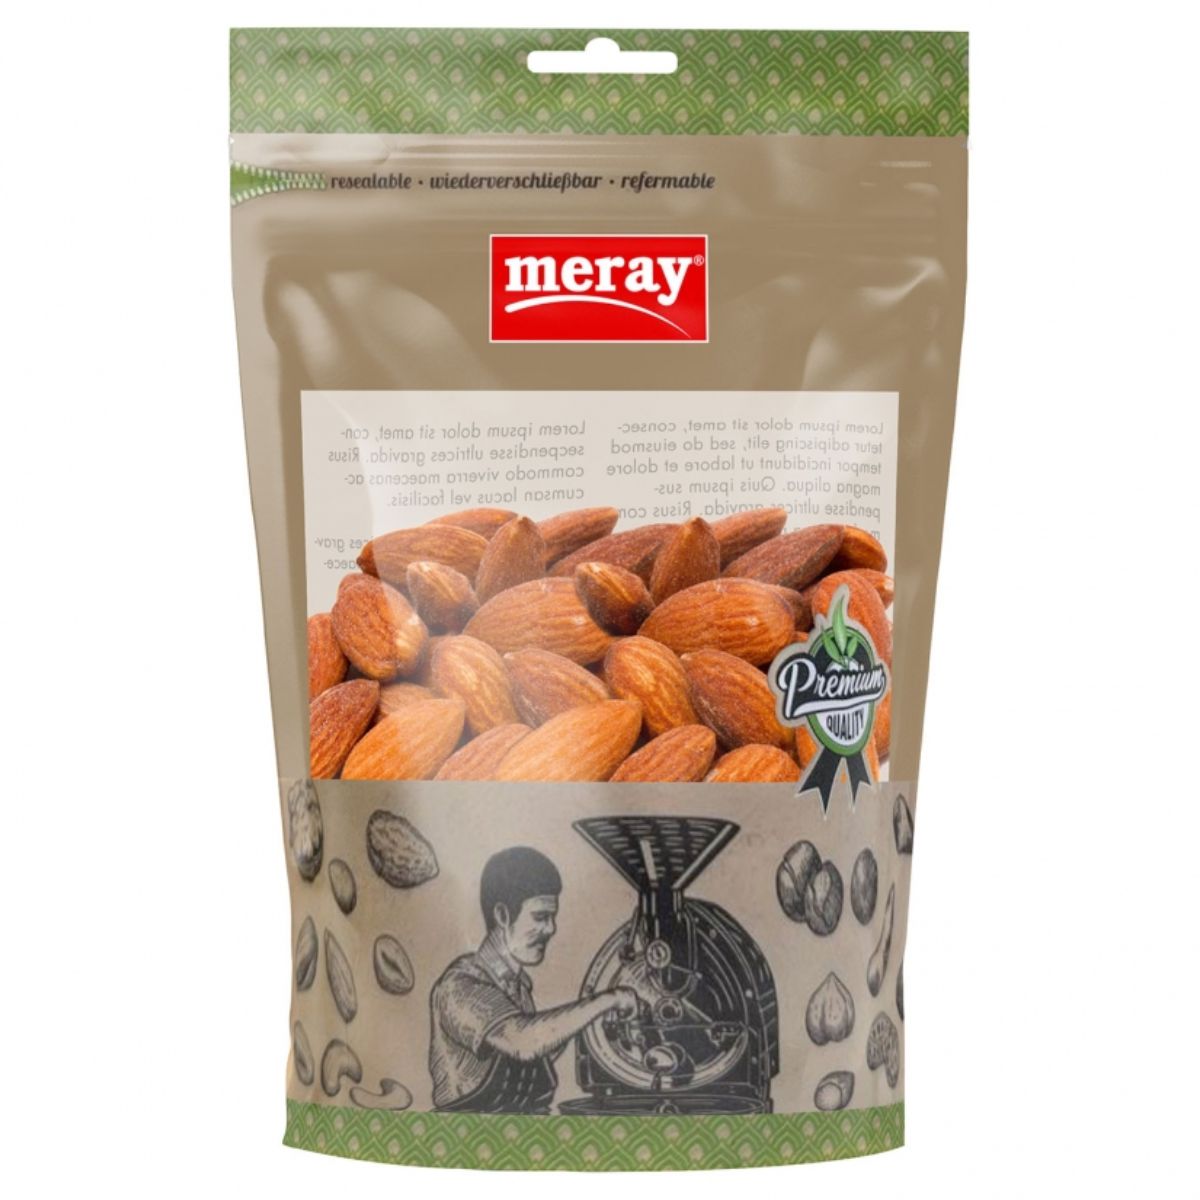 Meray almond kernels in a bag on a white background.